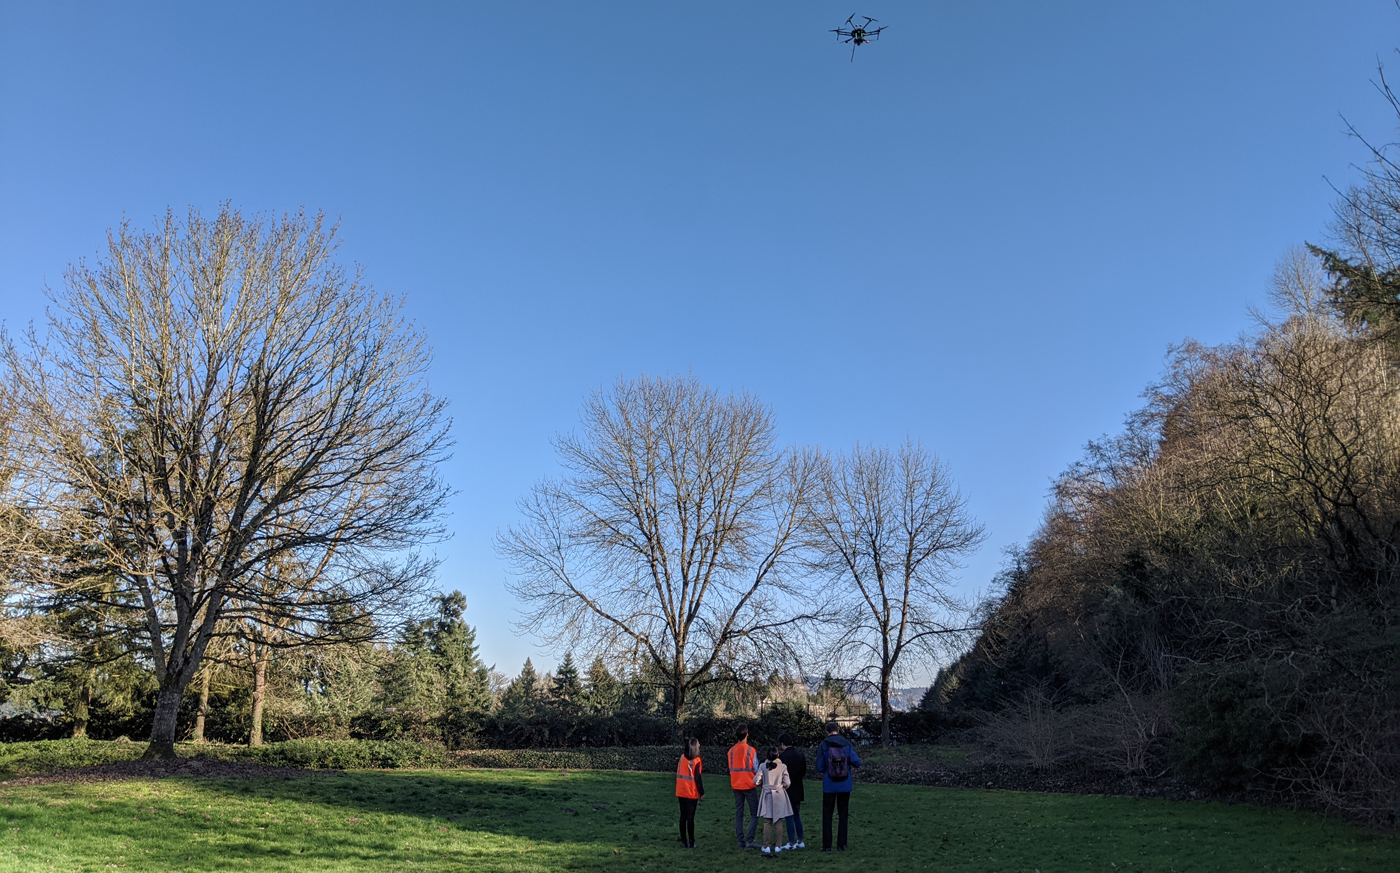 A group of five people watch a drone flying in the sky above a field and trees.